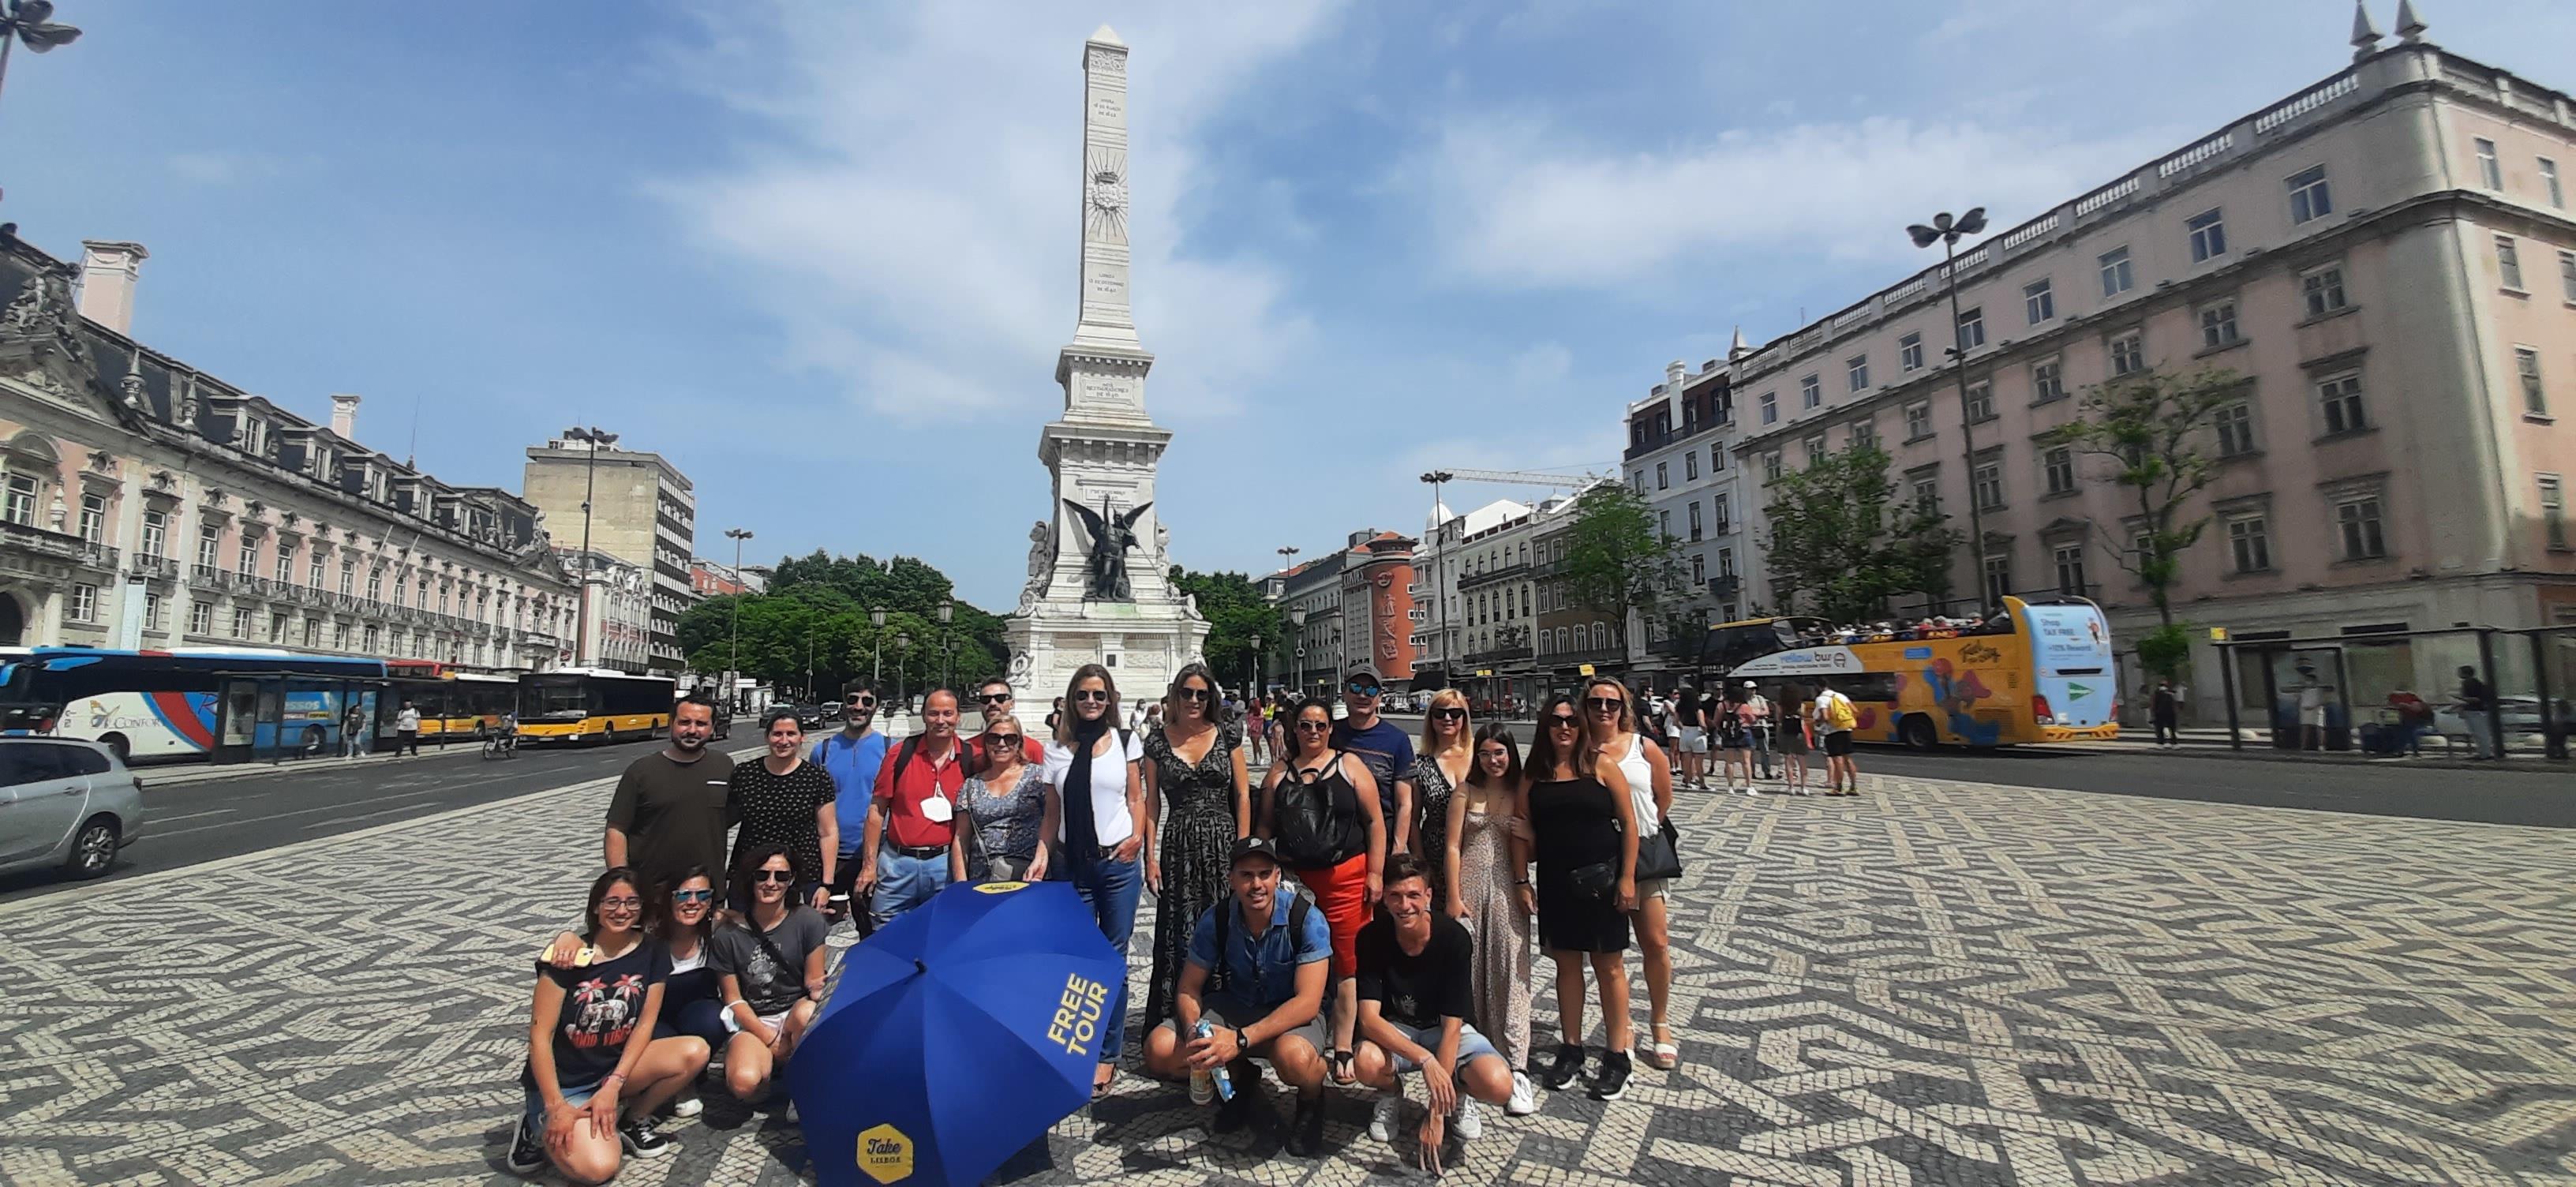 LISBON-Free-Walking-Tour:-The-Heart-of-the-City-1